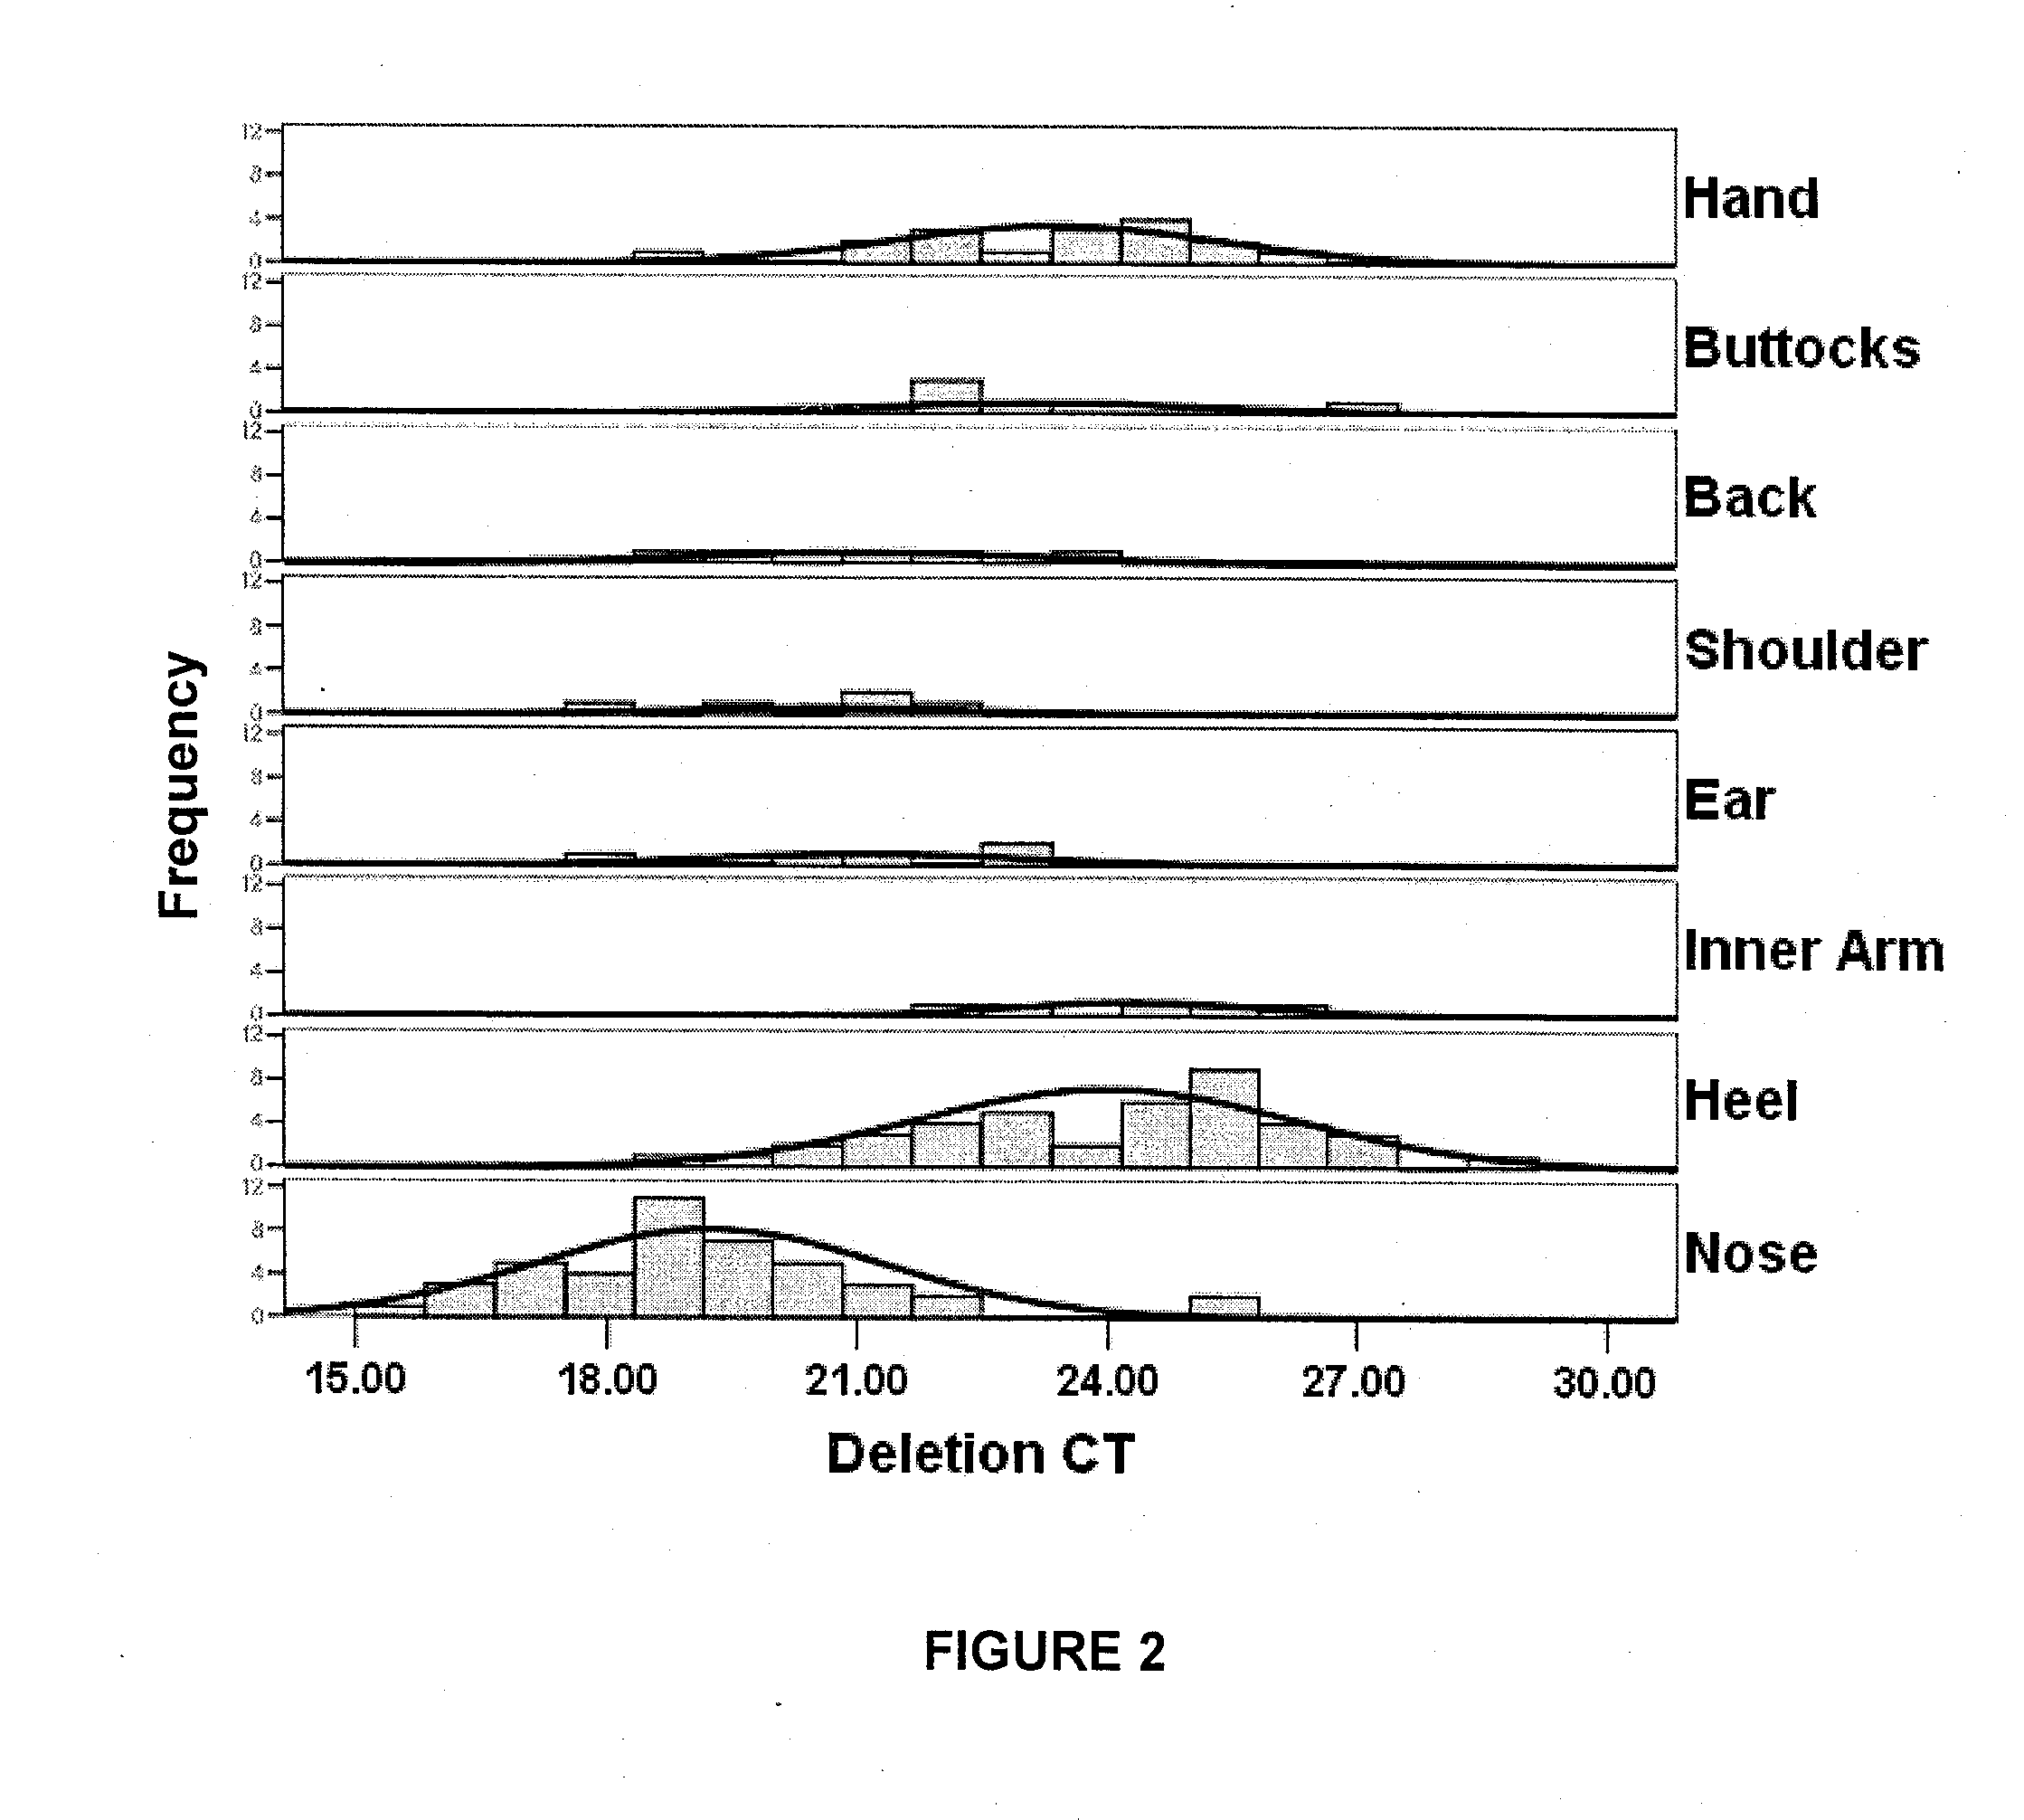 Methods for Assaying MC1R Variants and Mitochondrial Markers in Skin Samples